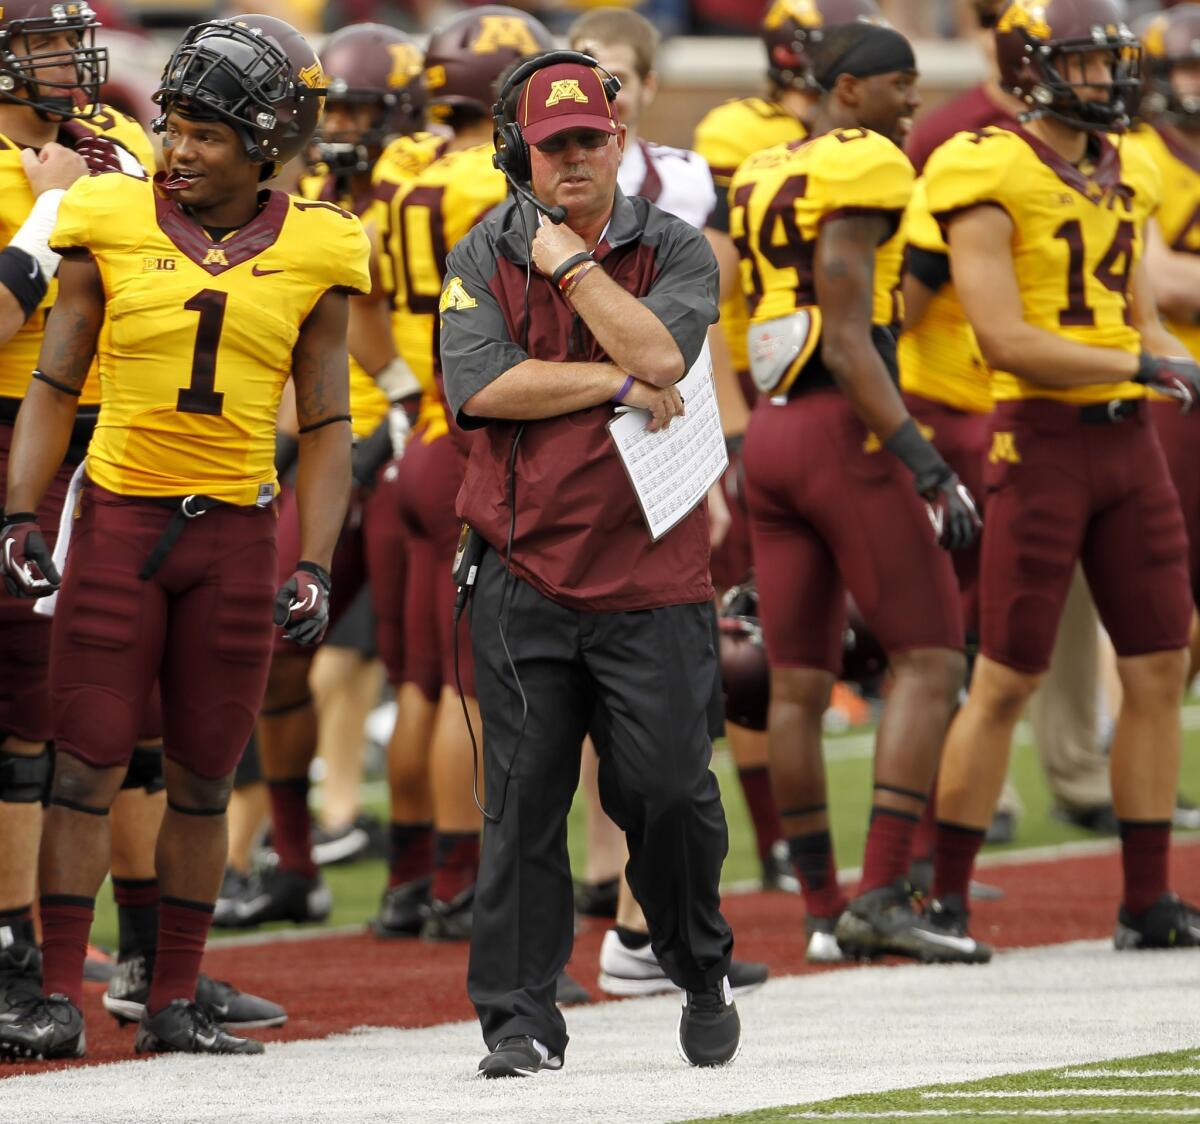 Minnesota Coach Jerry Kill walks the sideline during the first half of the Golden Gophers' game against Western Illinois on Saturday.